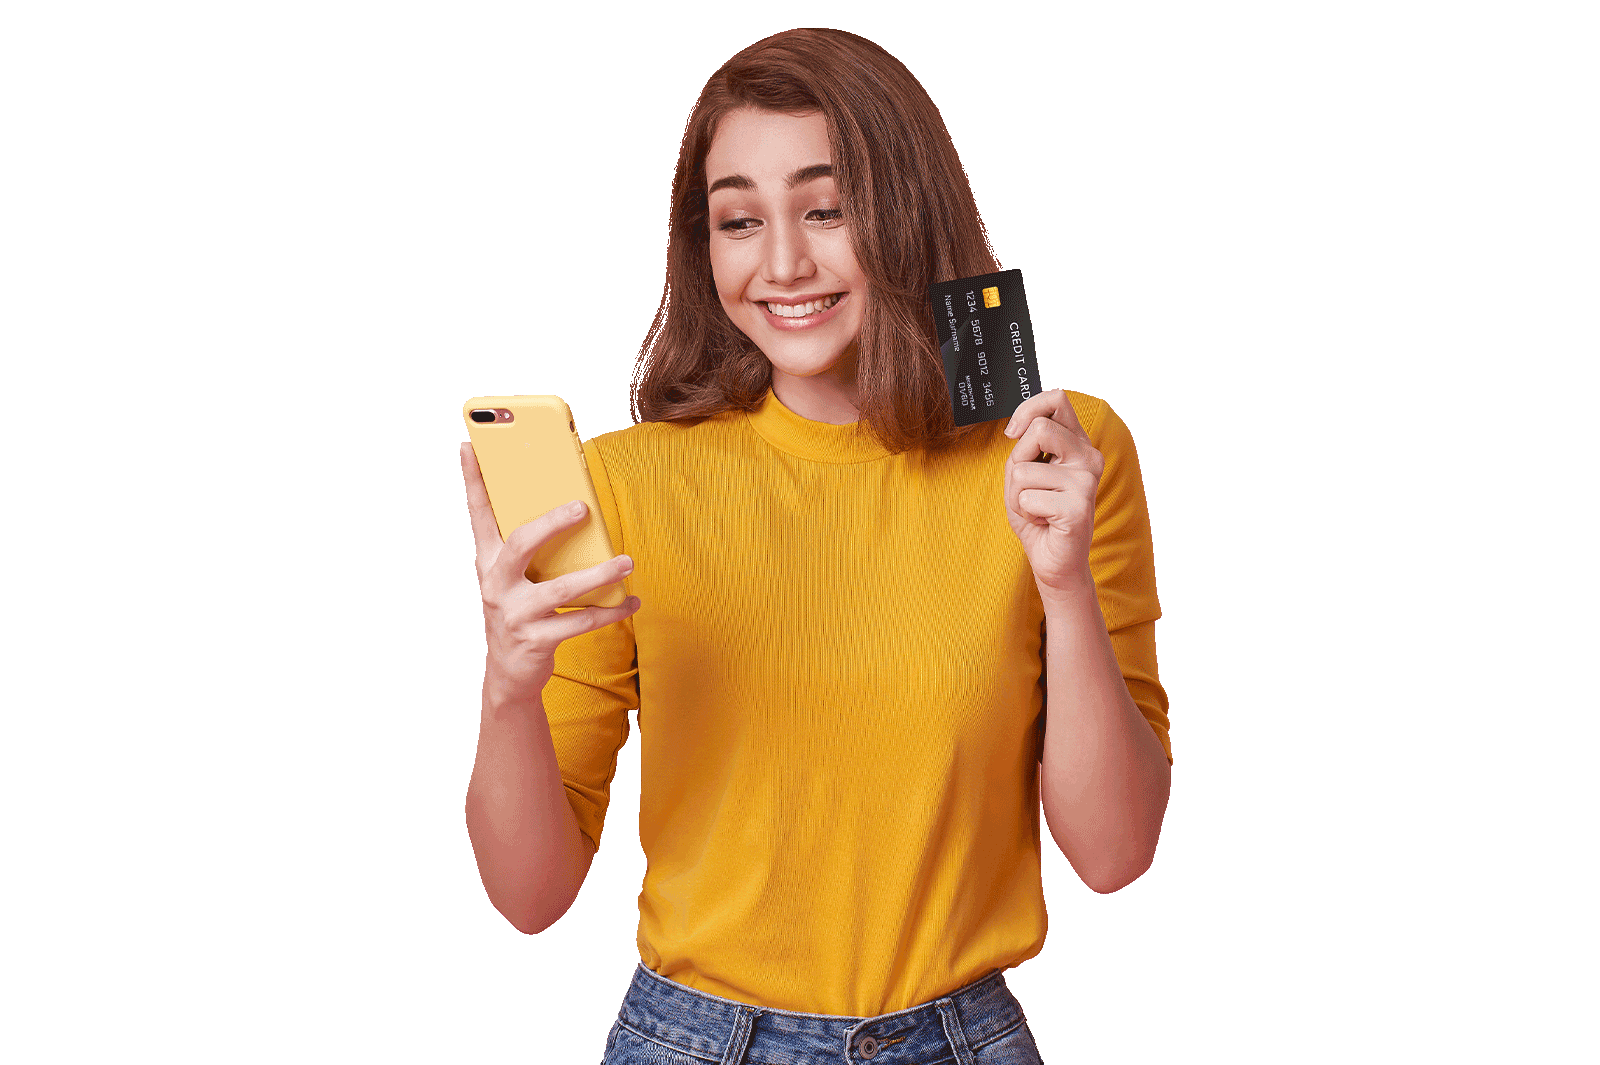 Young woman smiling at her cellphone and holding a credit card